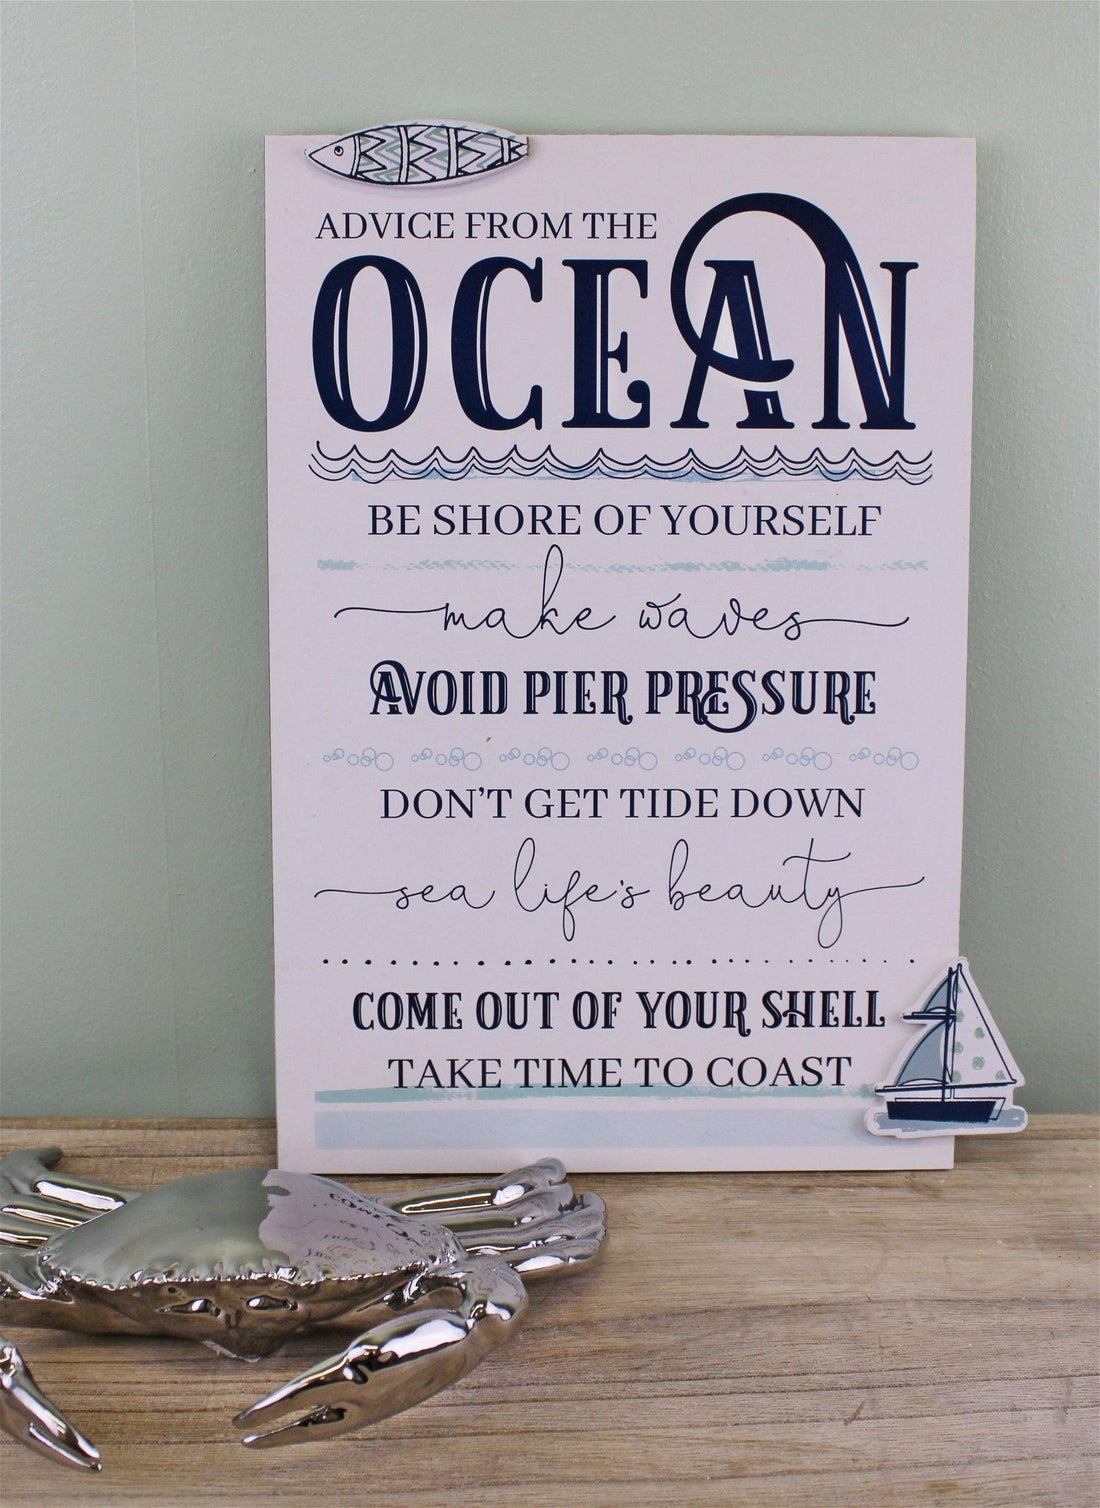 Rules Of The Ocean Wall Plaque - £12.99 - Pictures 